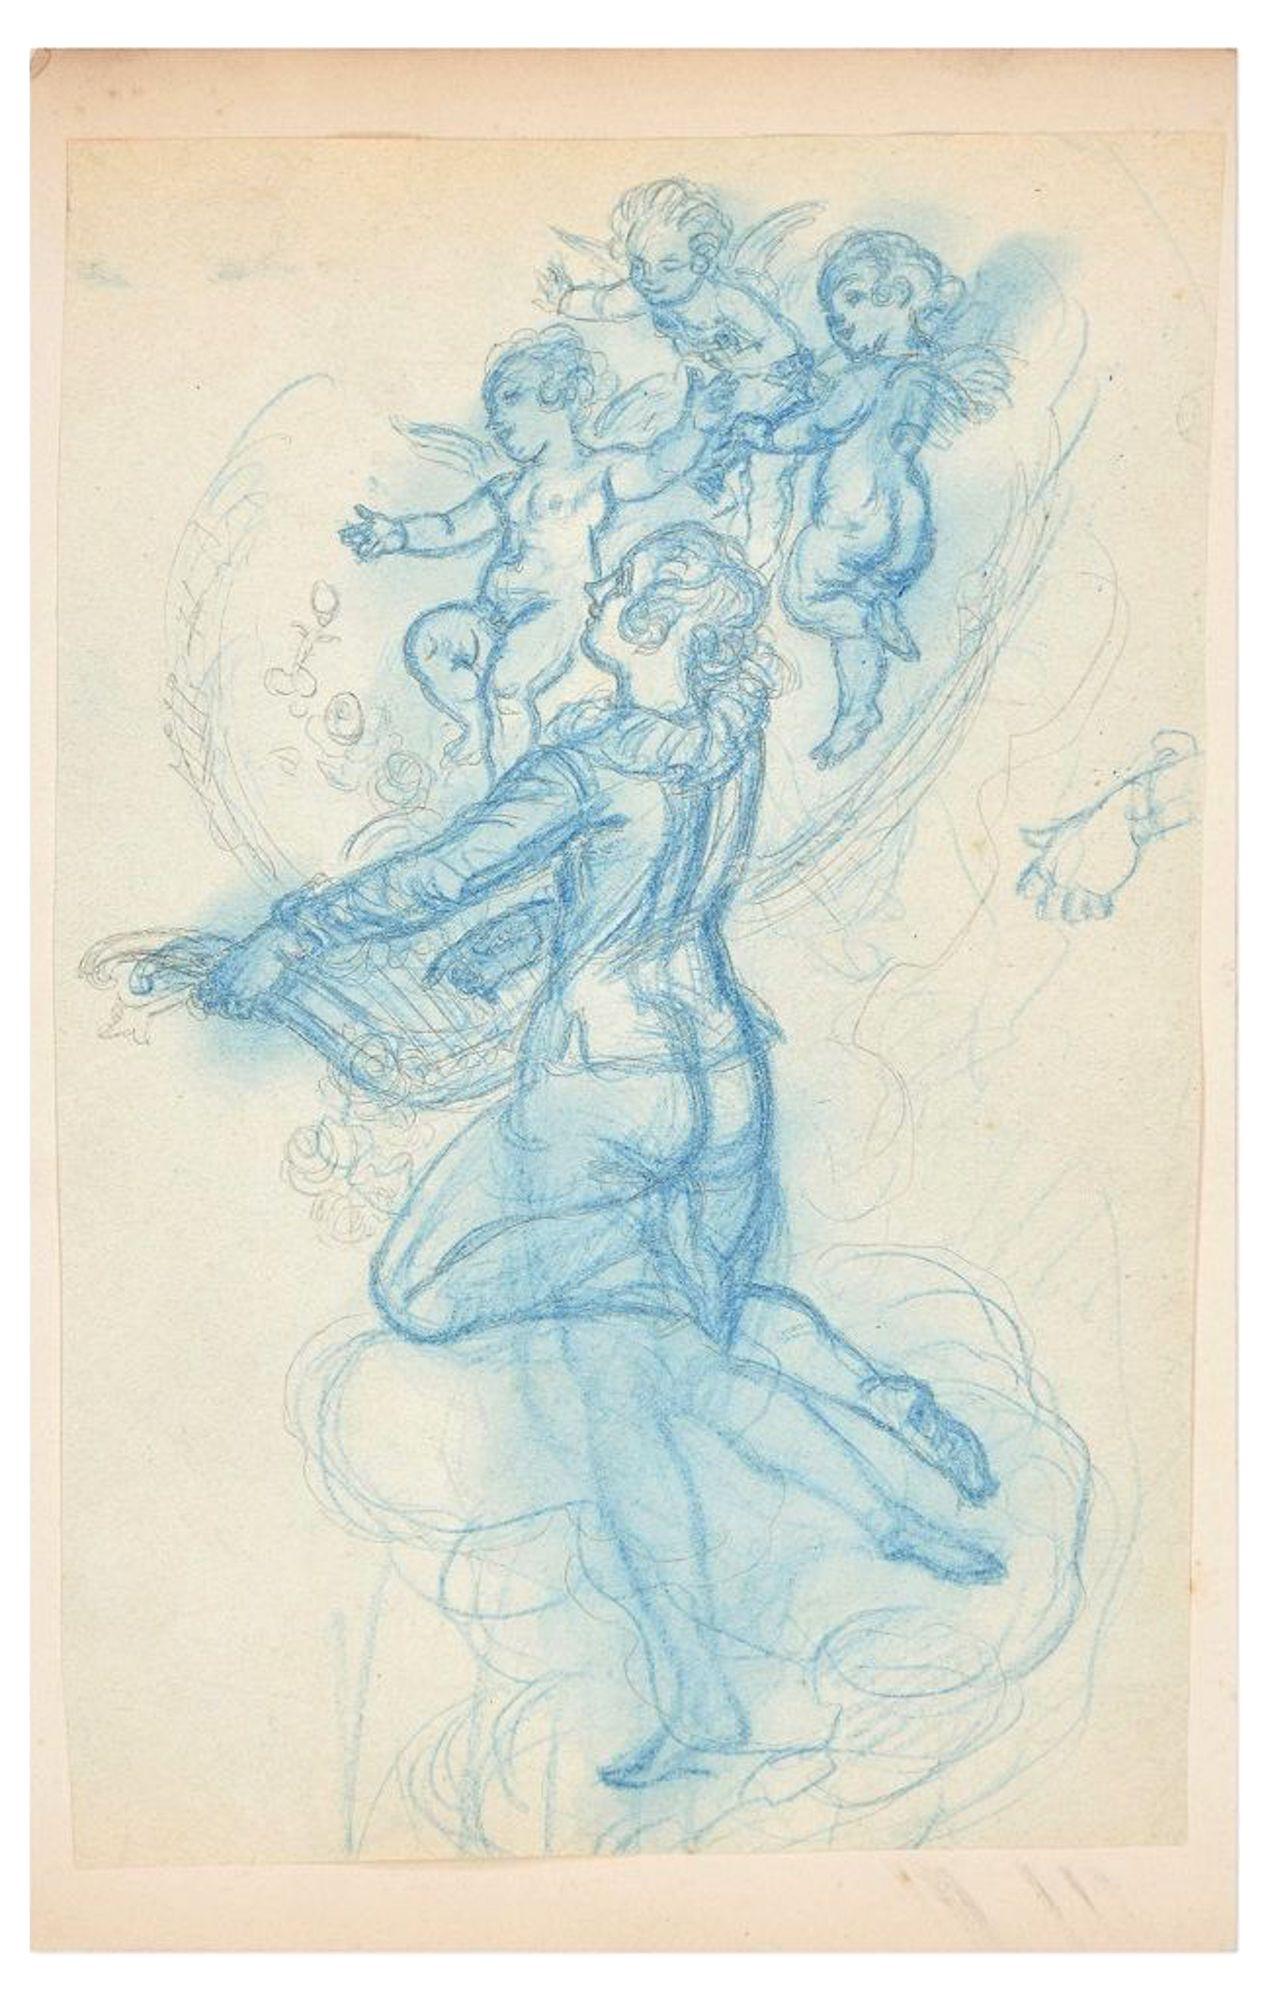 Adolphe Willette  Figurative Art - Study with three Angels - Drawing by A. Willette - End of 19th Century